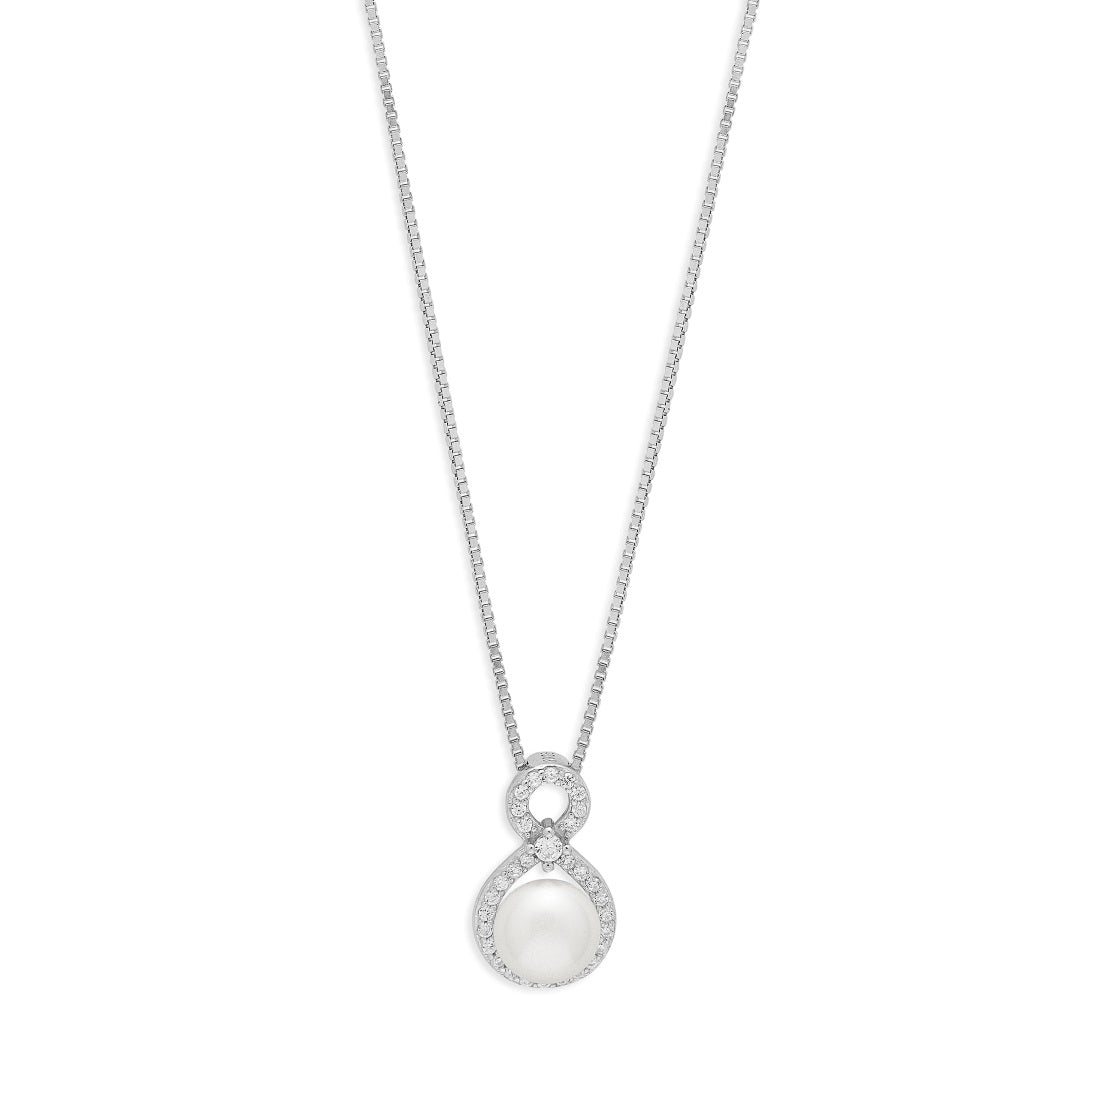 Celestial Cascade Rhodium-Plated 925 Sterling Silver Pendant with Chain